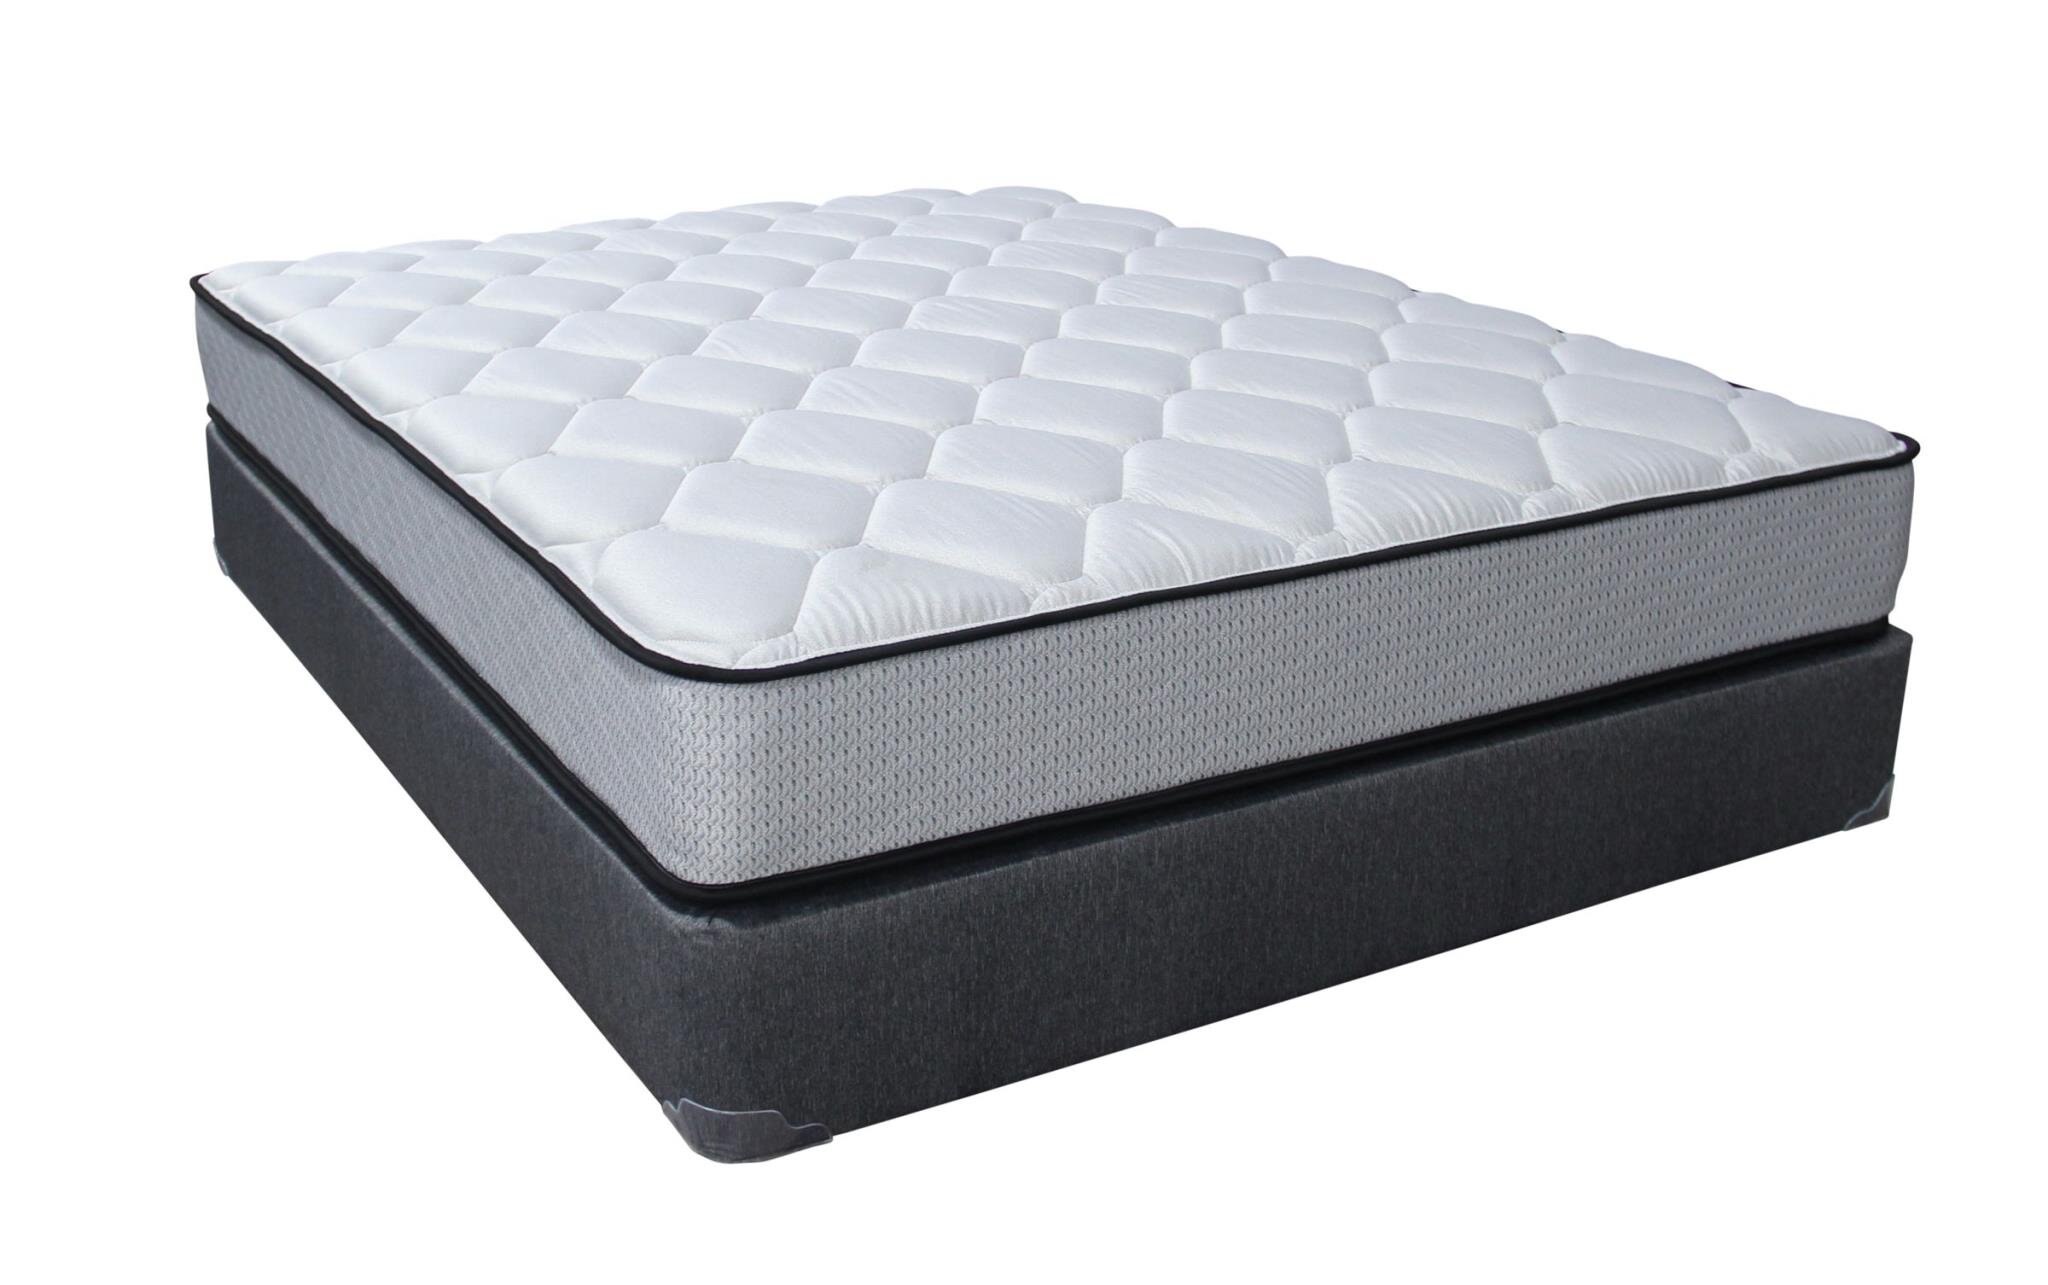 Two Sided Mattress Hotsell, 54% OFF | edetaria.com